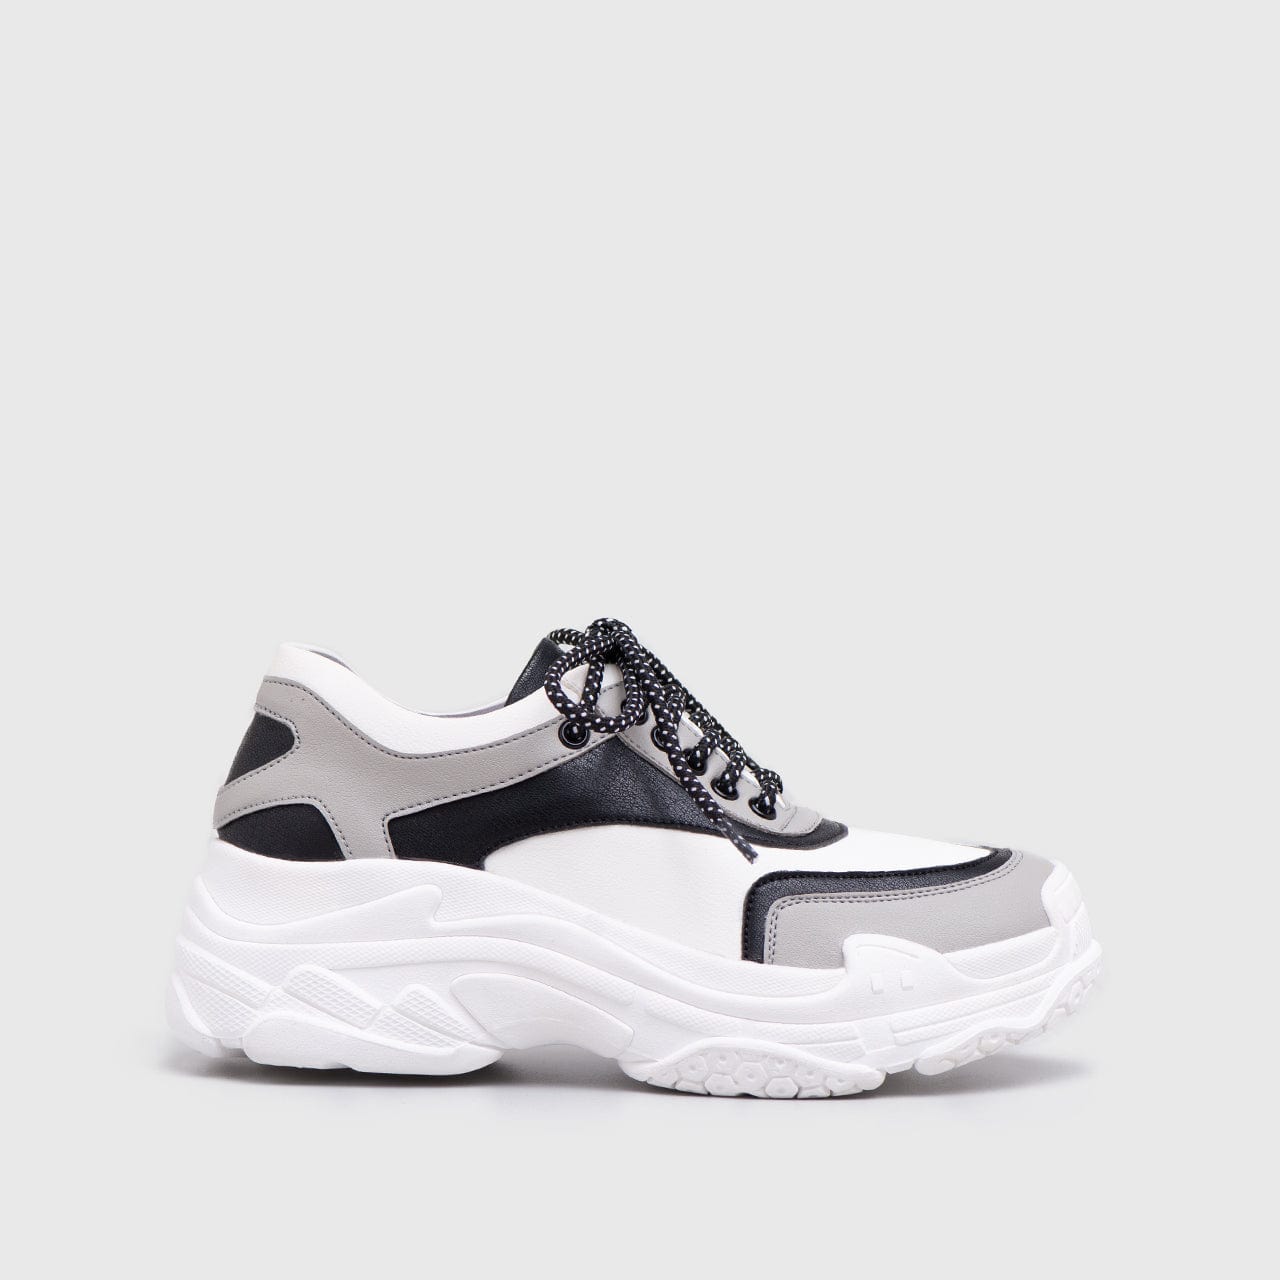 Adorable Projects Sneakers Alexa Monochrome Sneakers